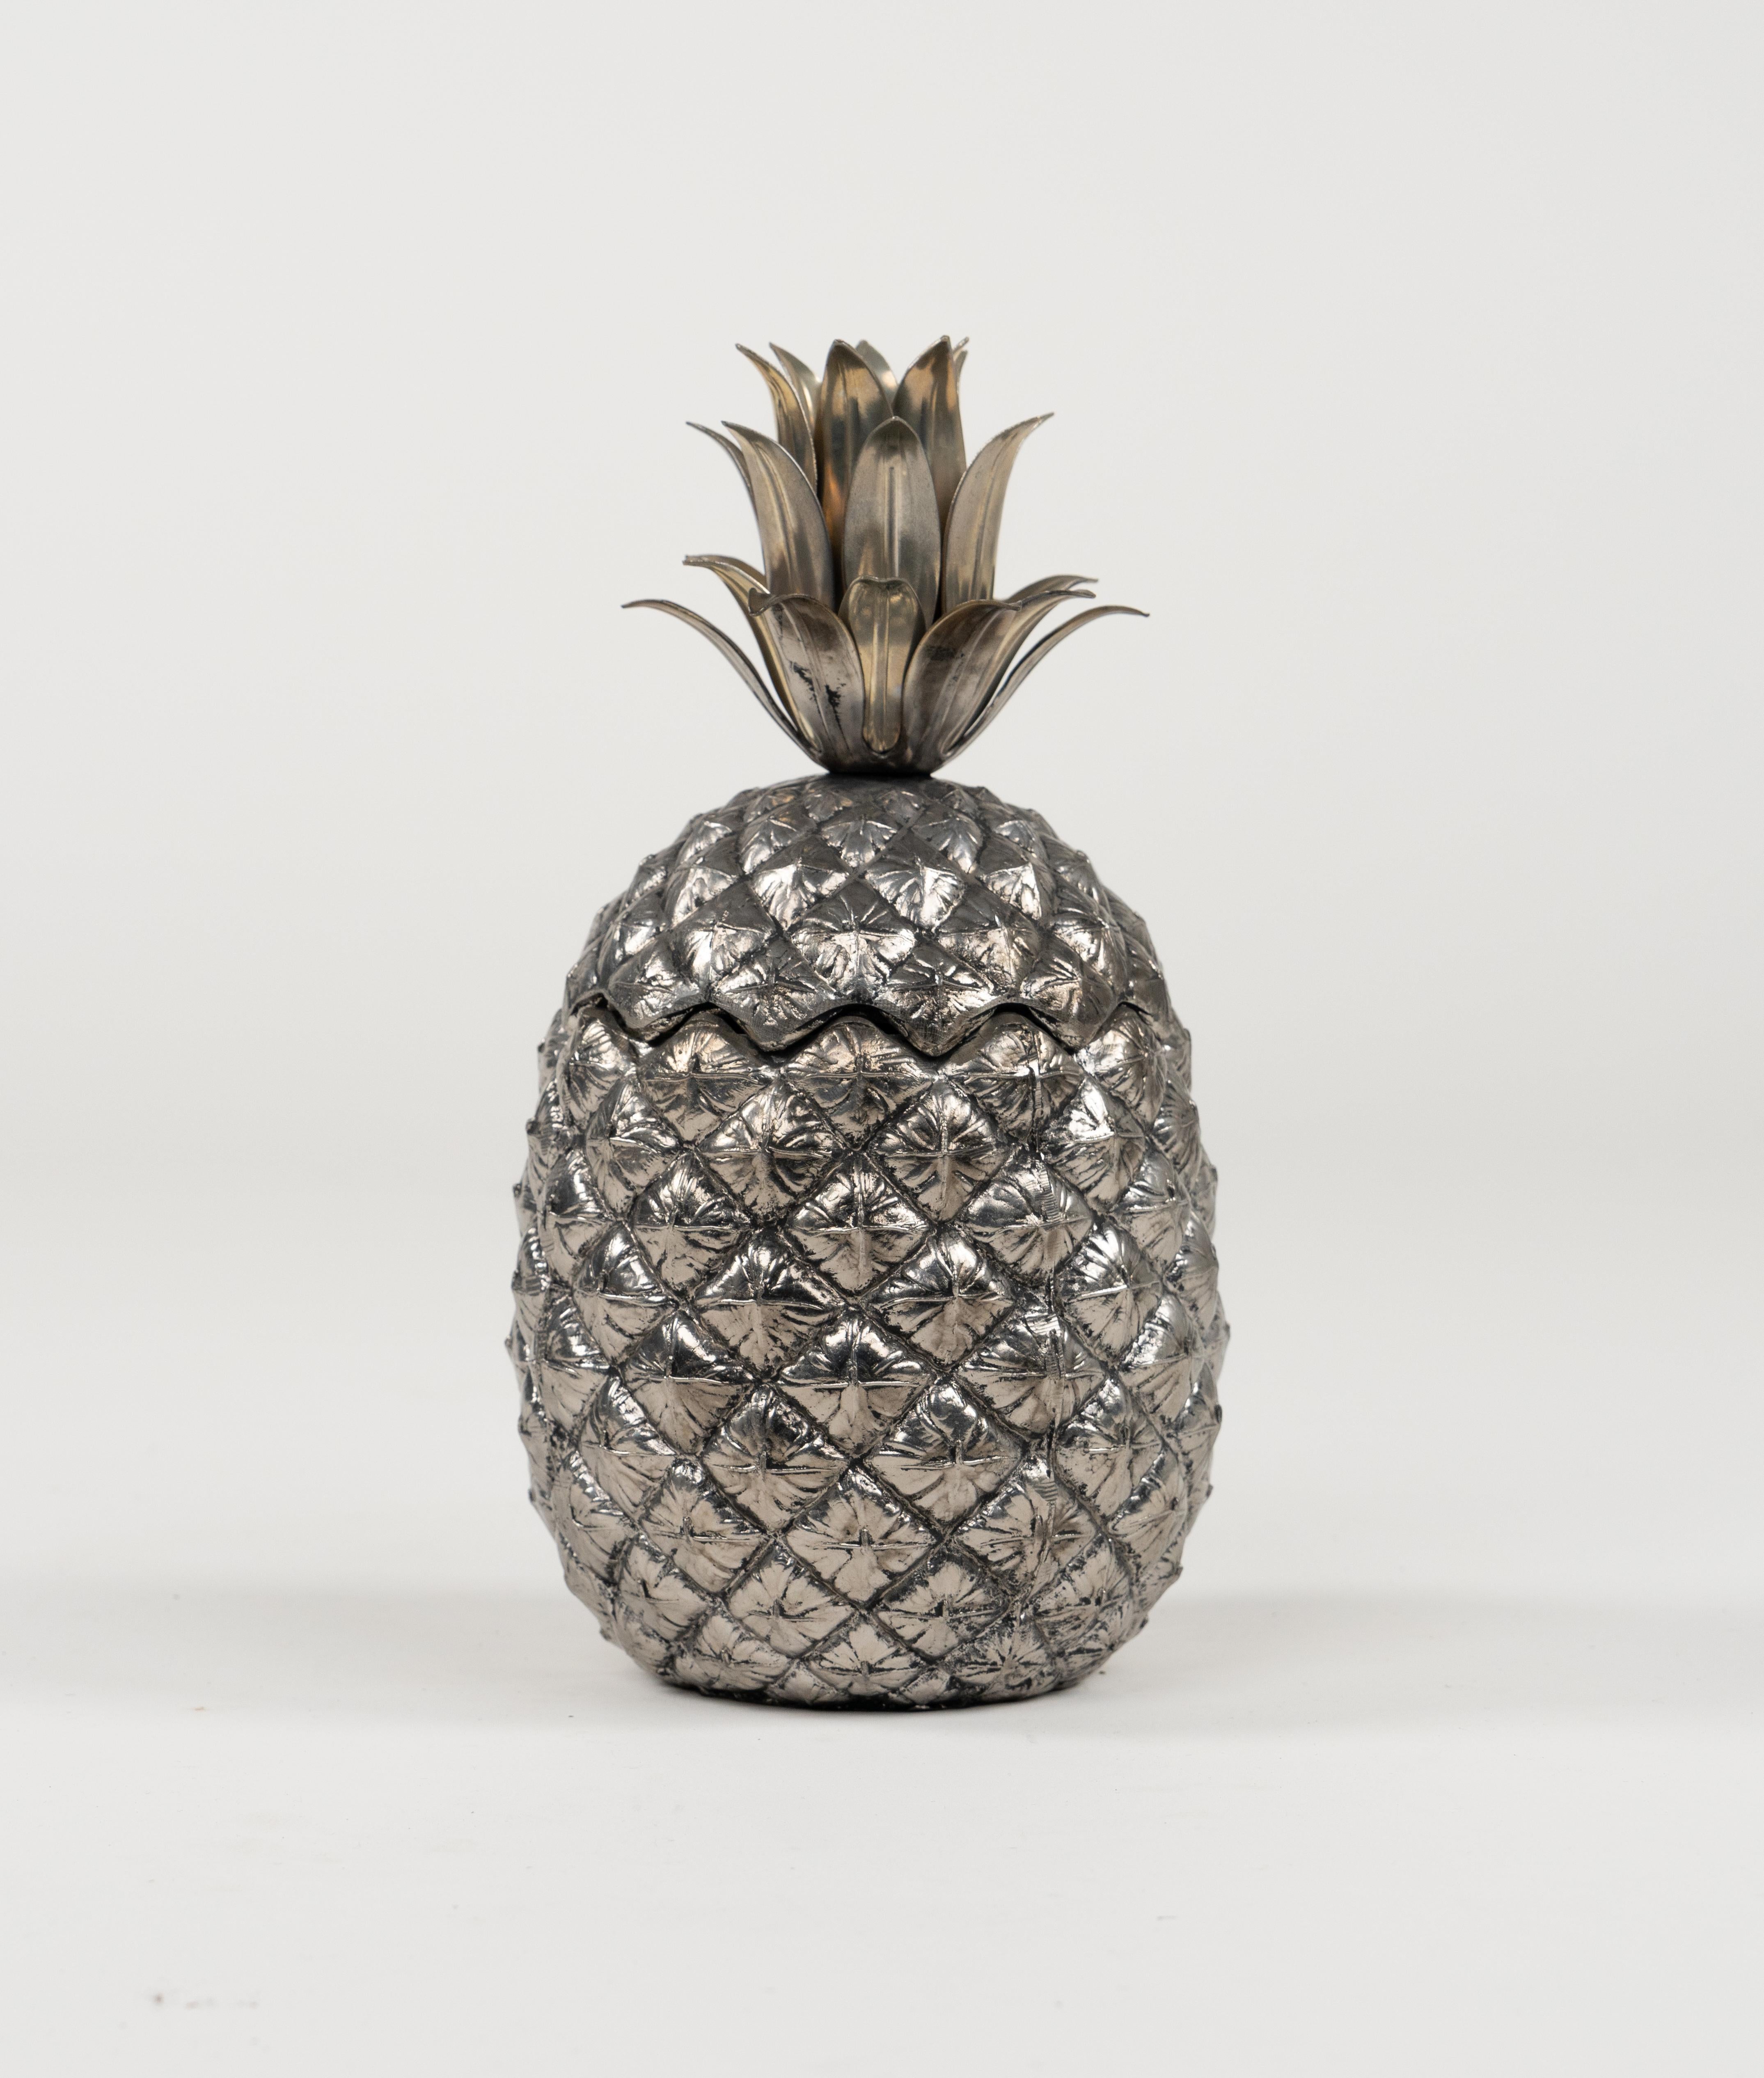 Midcentury beautiful form pineapple ice bucket, a container with lid, in pewter by Mauro Manetti for Fonderia D'Arte Firenze.

Made in Italy in the 1960s.

Manufacturer's stamp on the bottom the bucket.